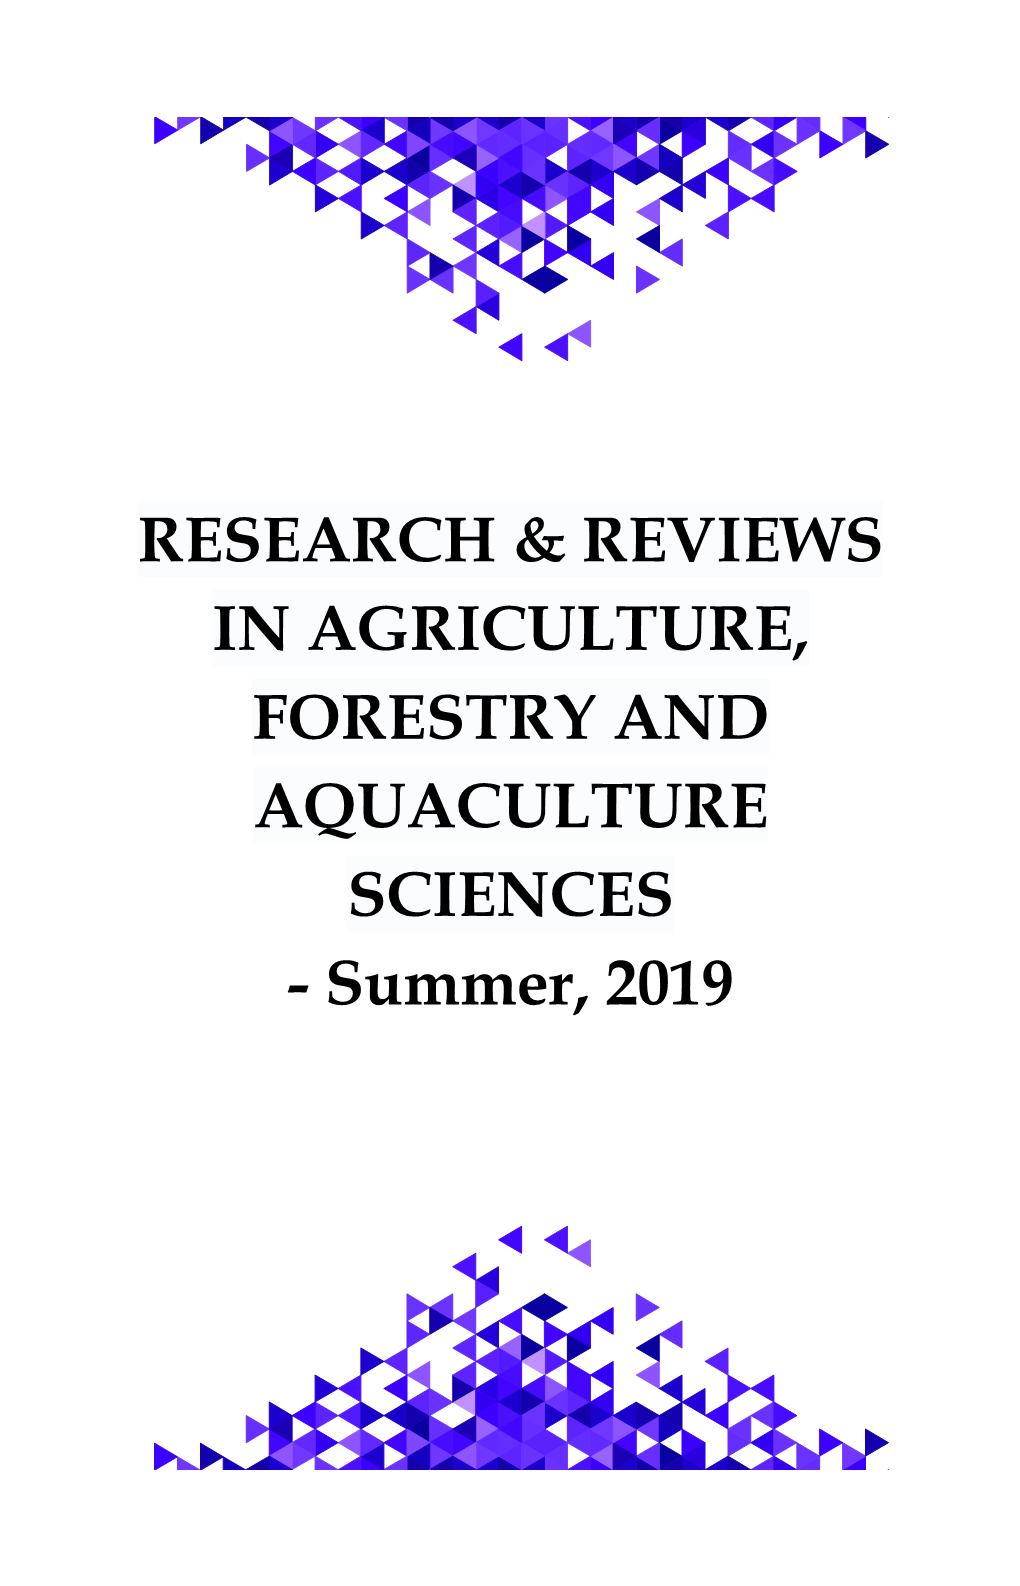 Research & Reviews in Agriculture, Forestry and Aquaculture Sciences